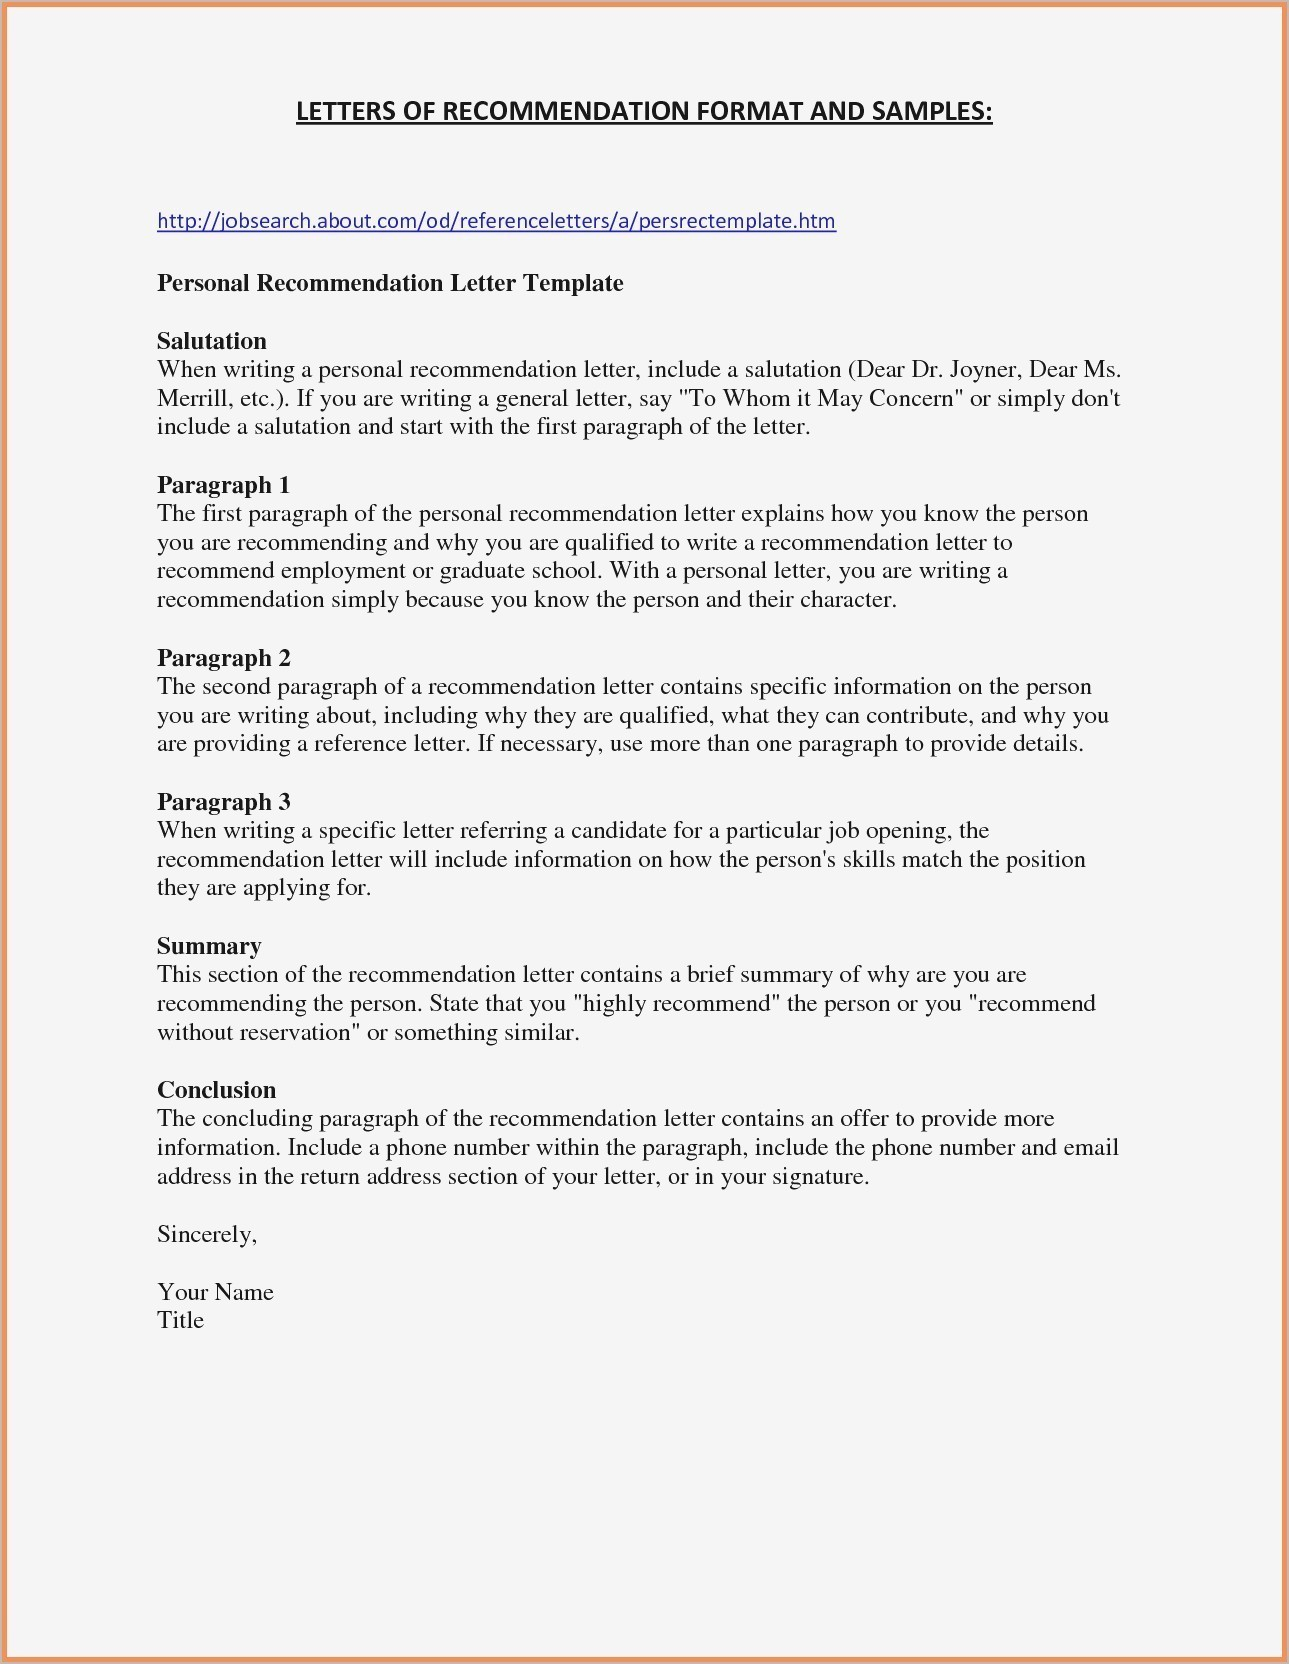 Letter Of Recommendation Letter Template - Job Re Mendation Letter Samples Valid Sample Job Re Mendation